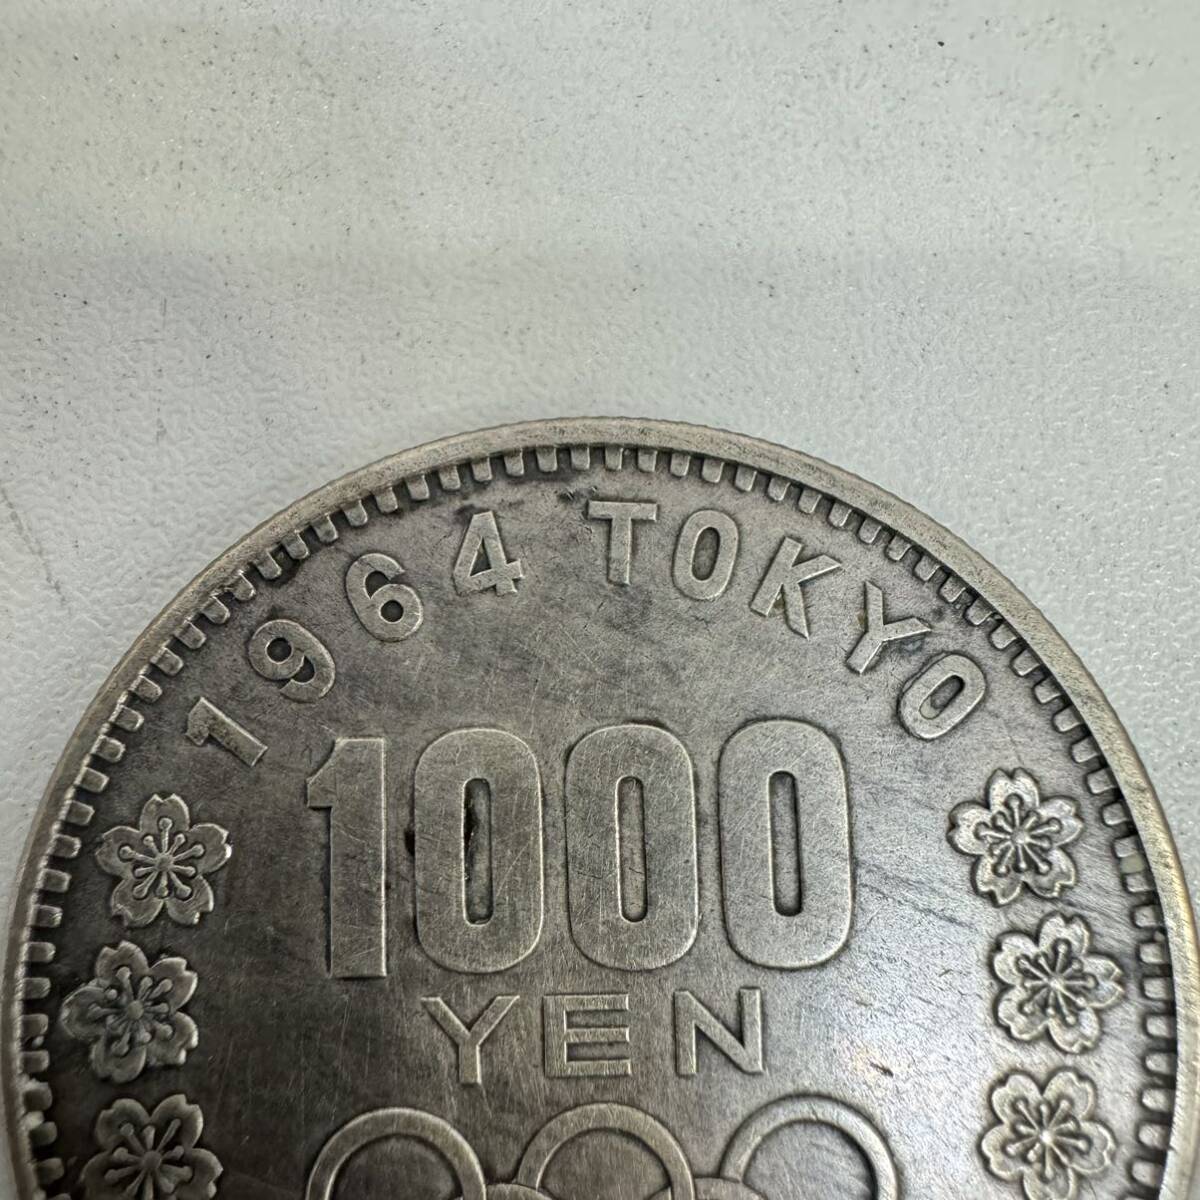 [TC0426①] Tokyo Olympic thousand jpy silver coin 1000 jpy commemorative coin money through . coin 1964 year Showa era 39 year . wheel silver SILVER SV 925 Japan Japan 